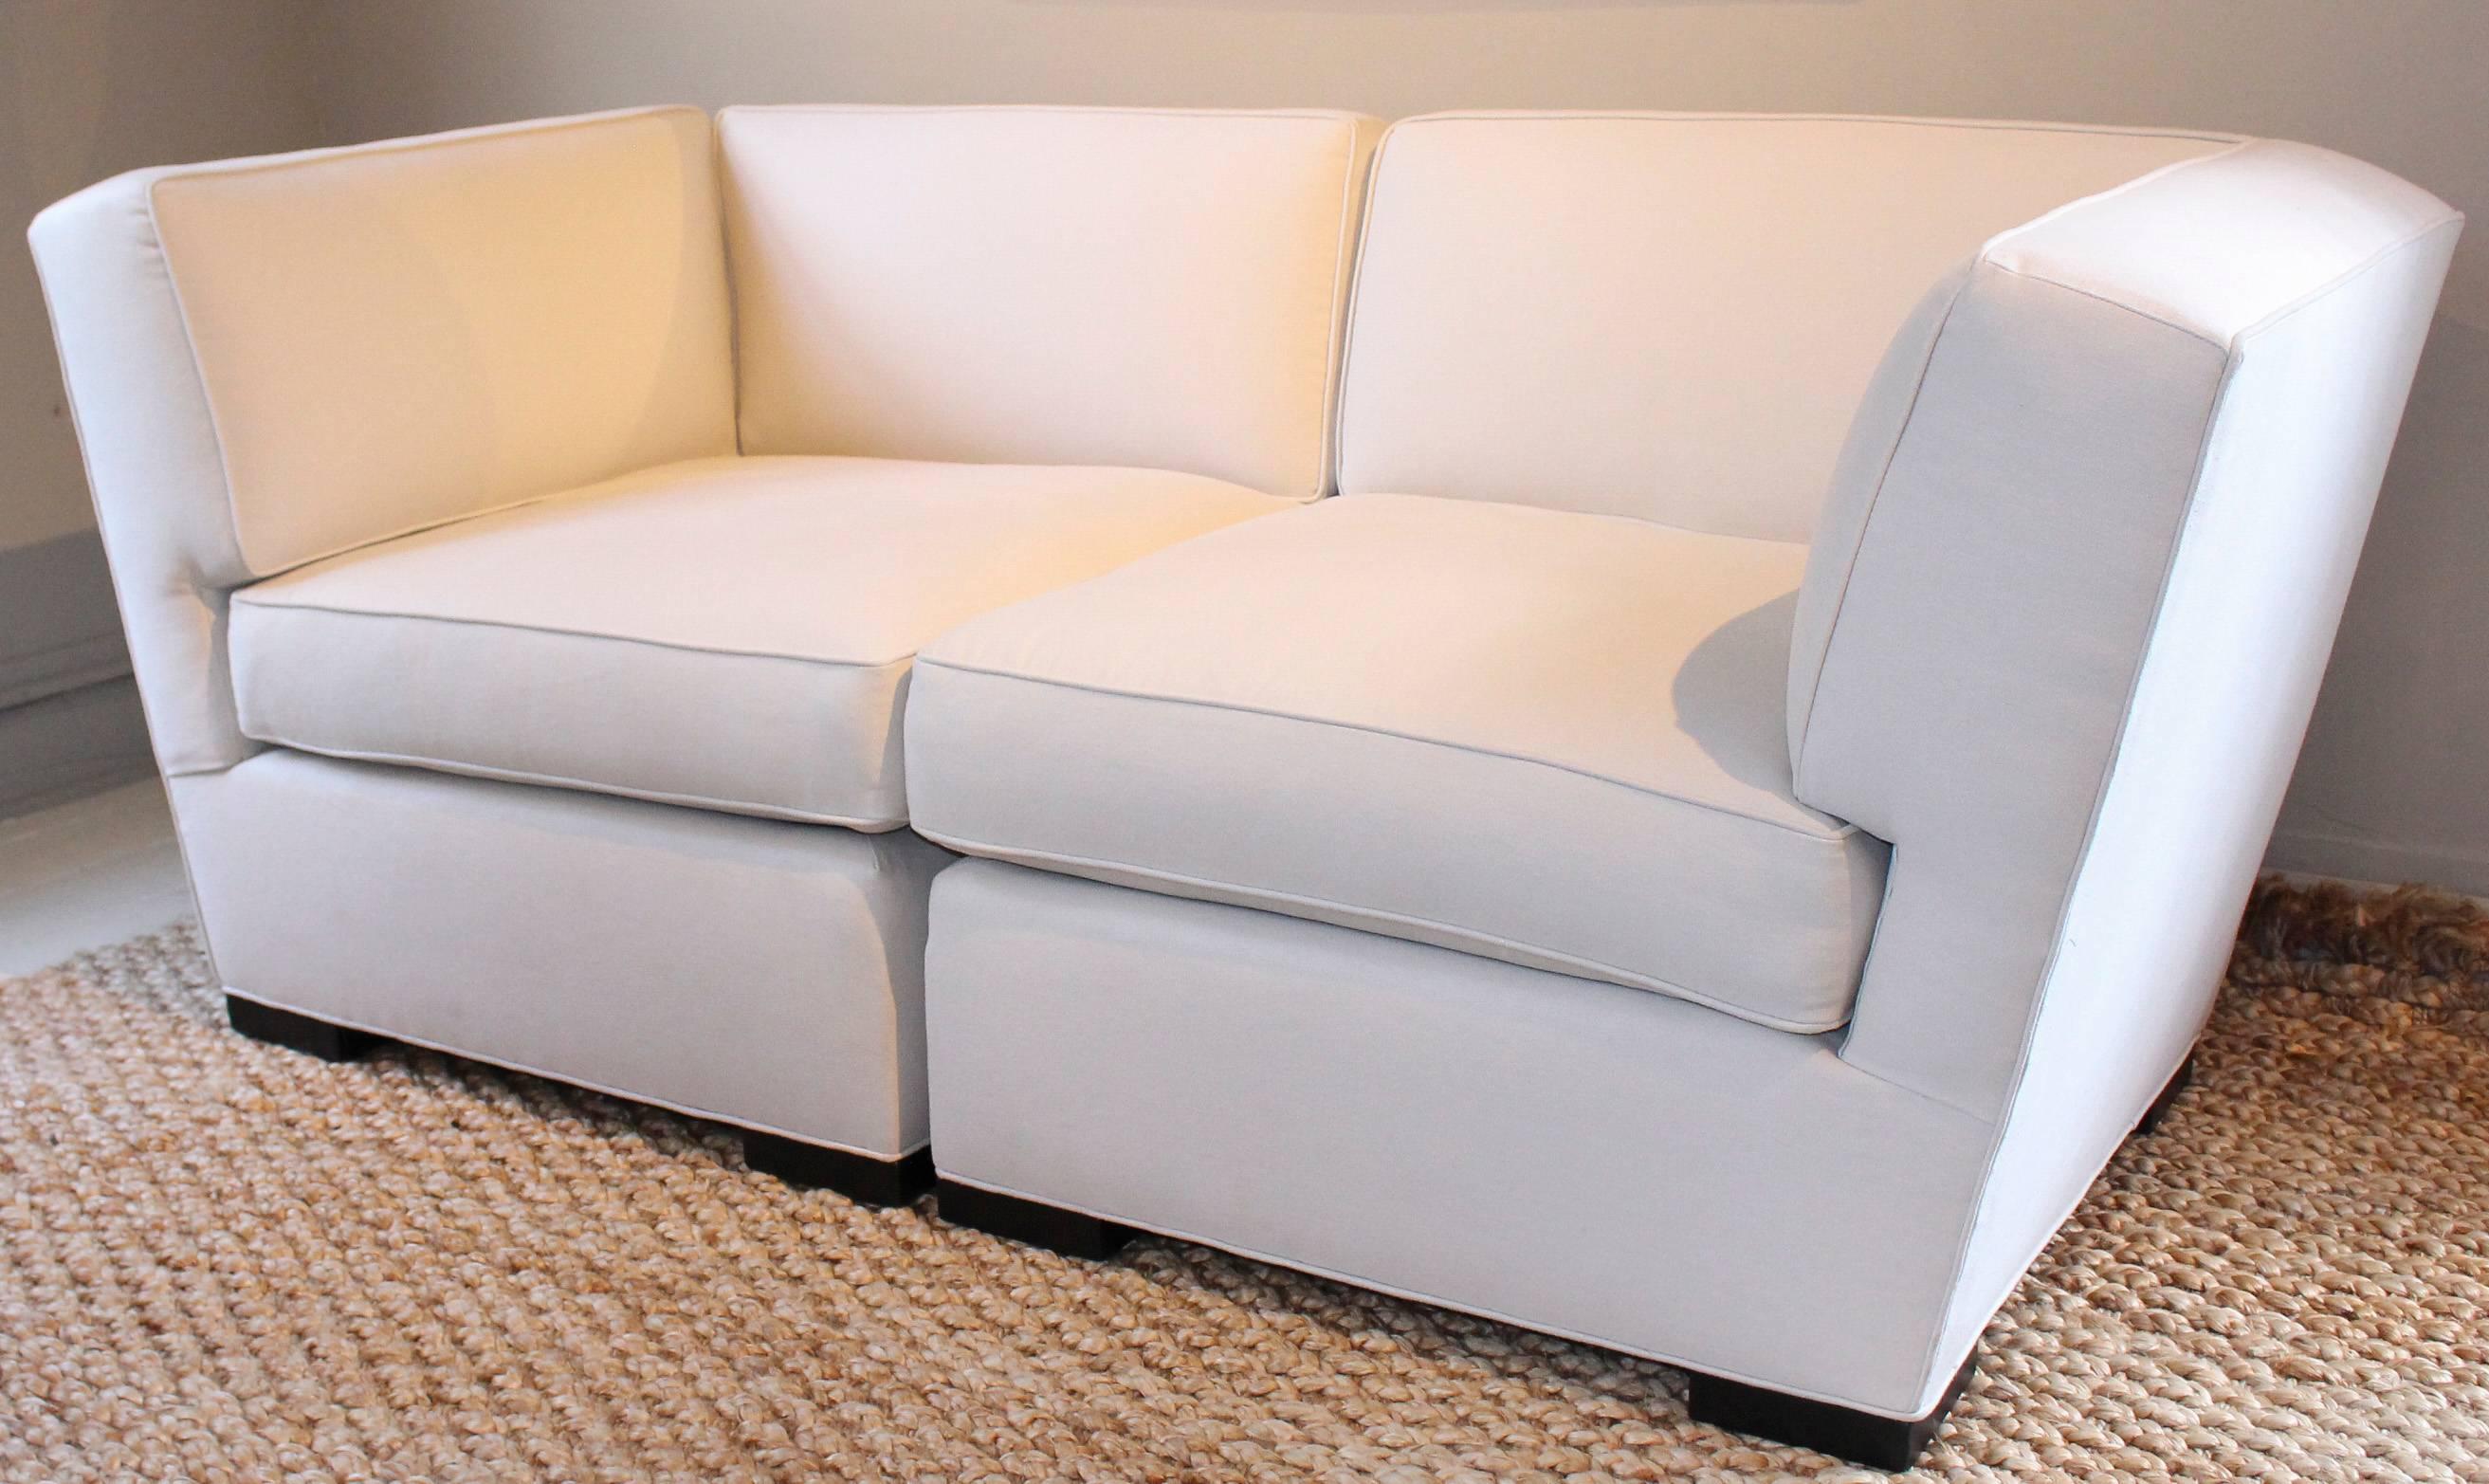 Donghia loveseat with angular armrests newly upholstered in a Rogers & Goffigon cotton. United by interlocking connecting hardware, the sections disconnect to be used as individual chairs.